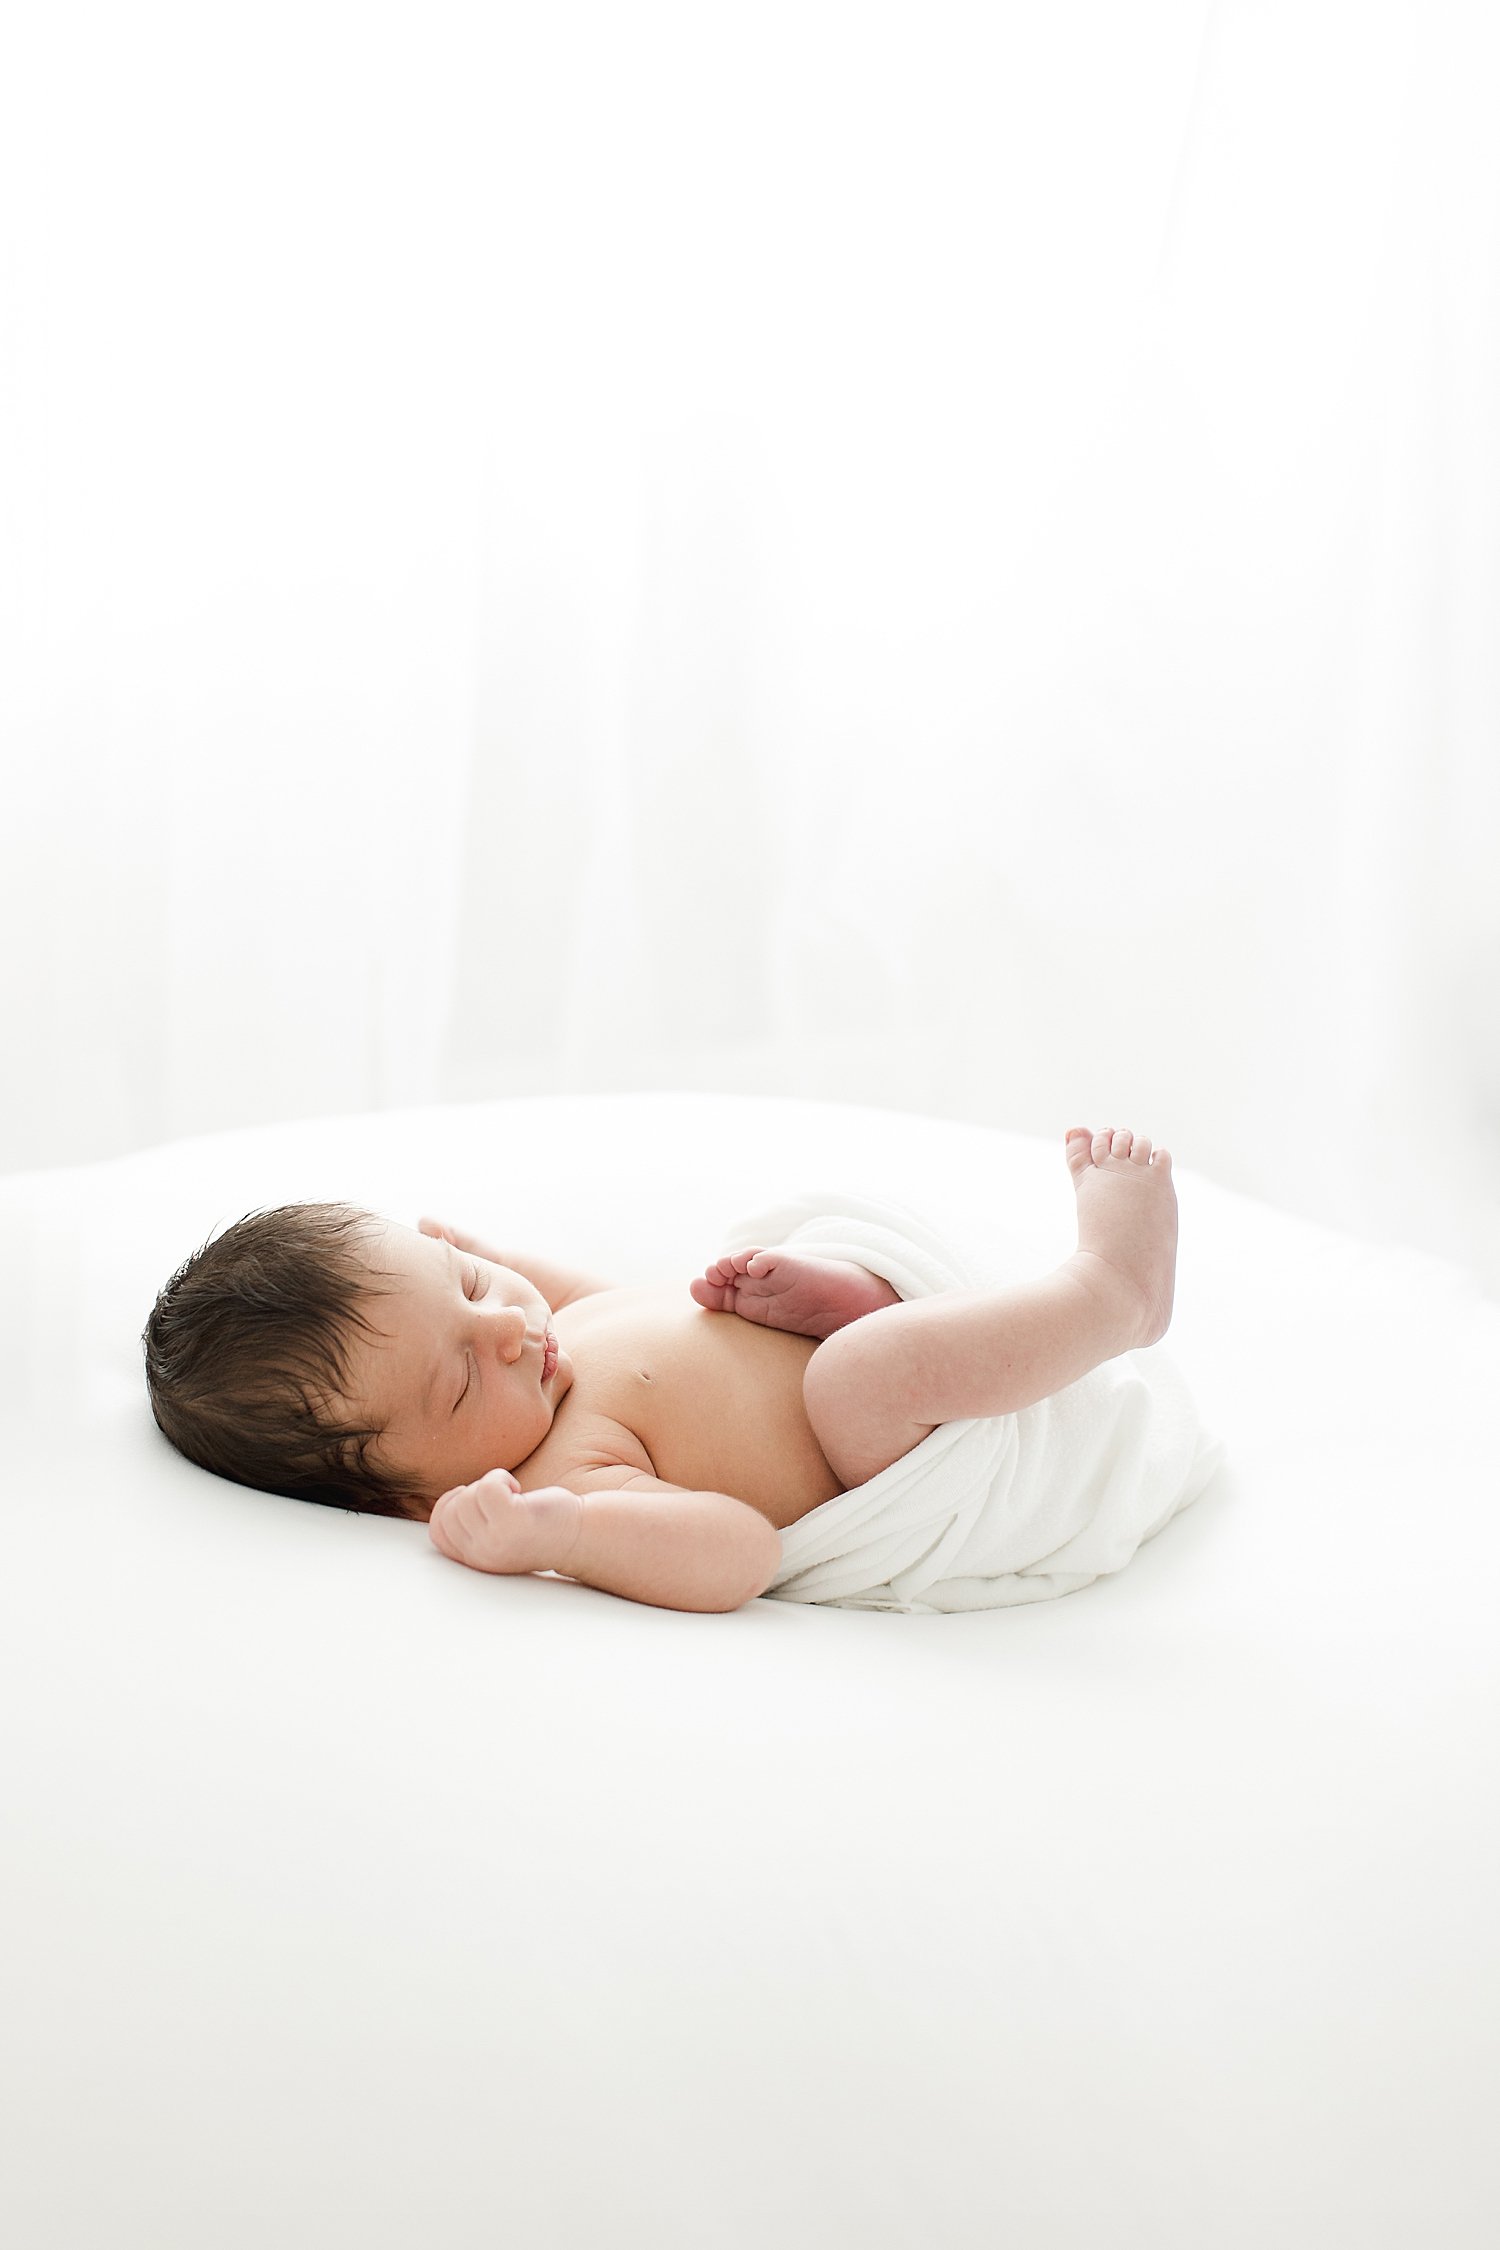 Baby boy swaddled in white laying on white blanket | Kristin Wood Photography